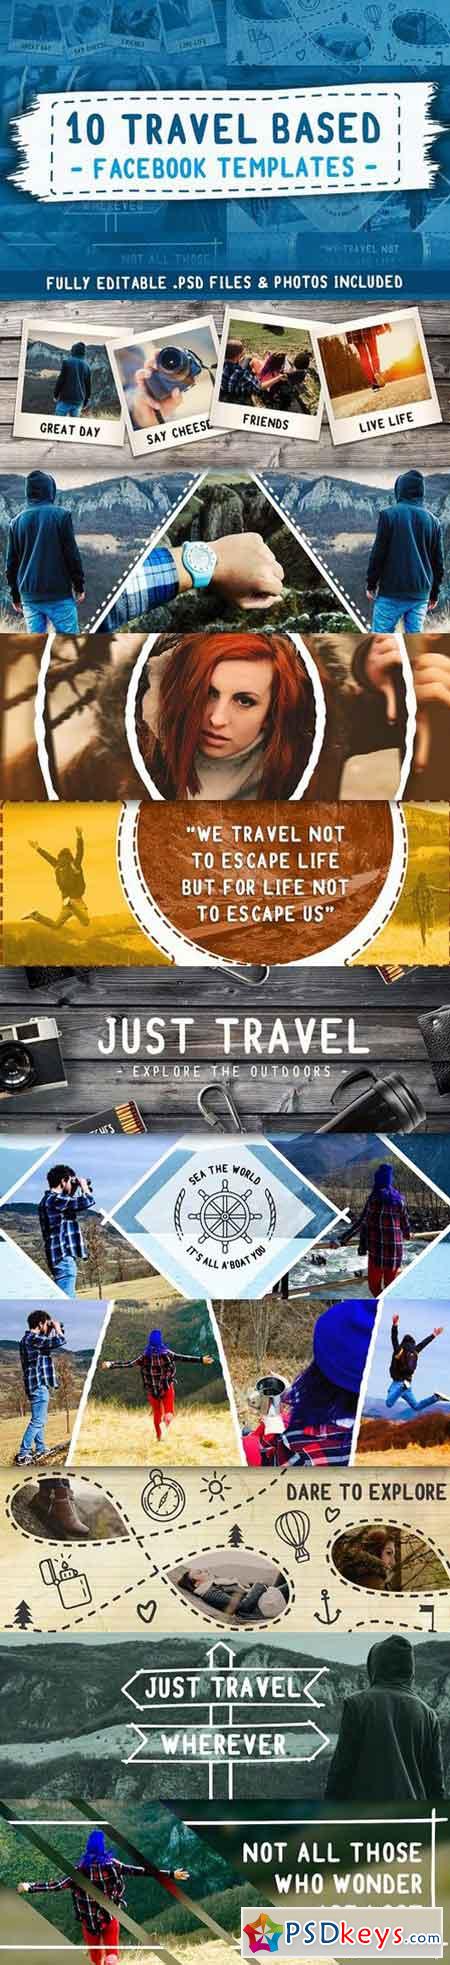 Travel Based PSD Facebook Templates 1546000